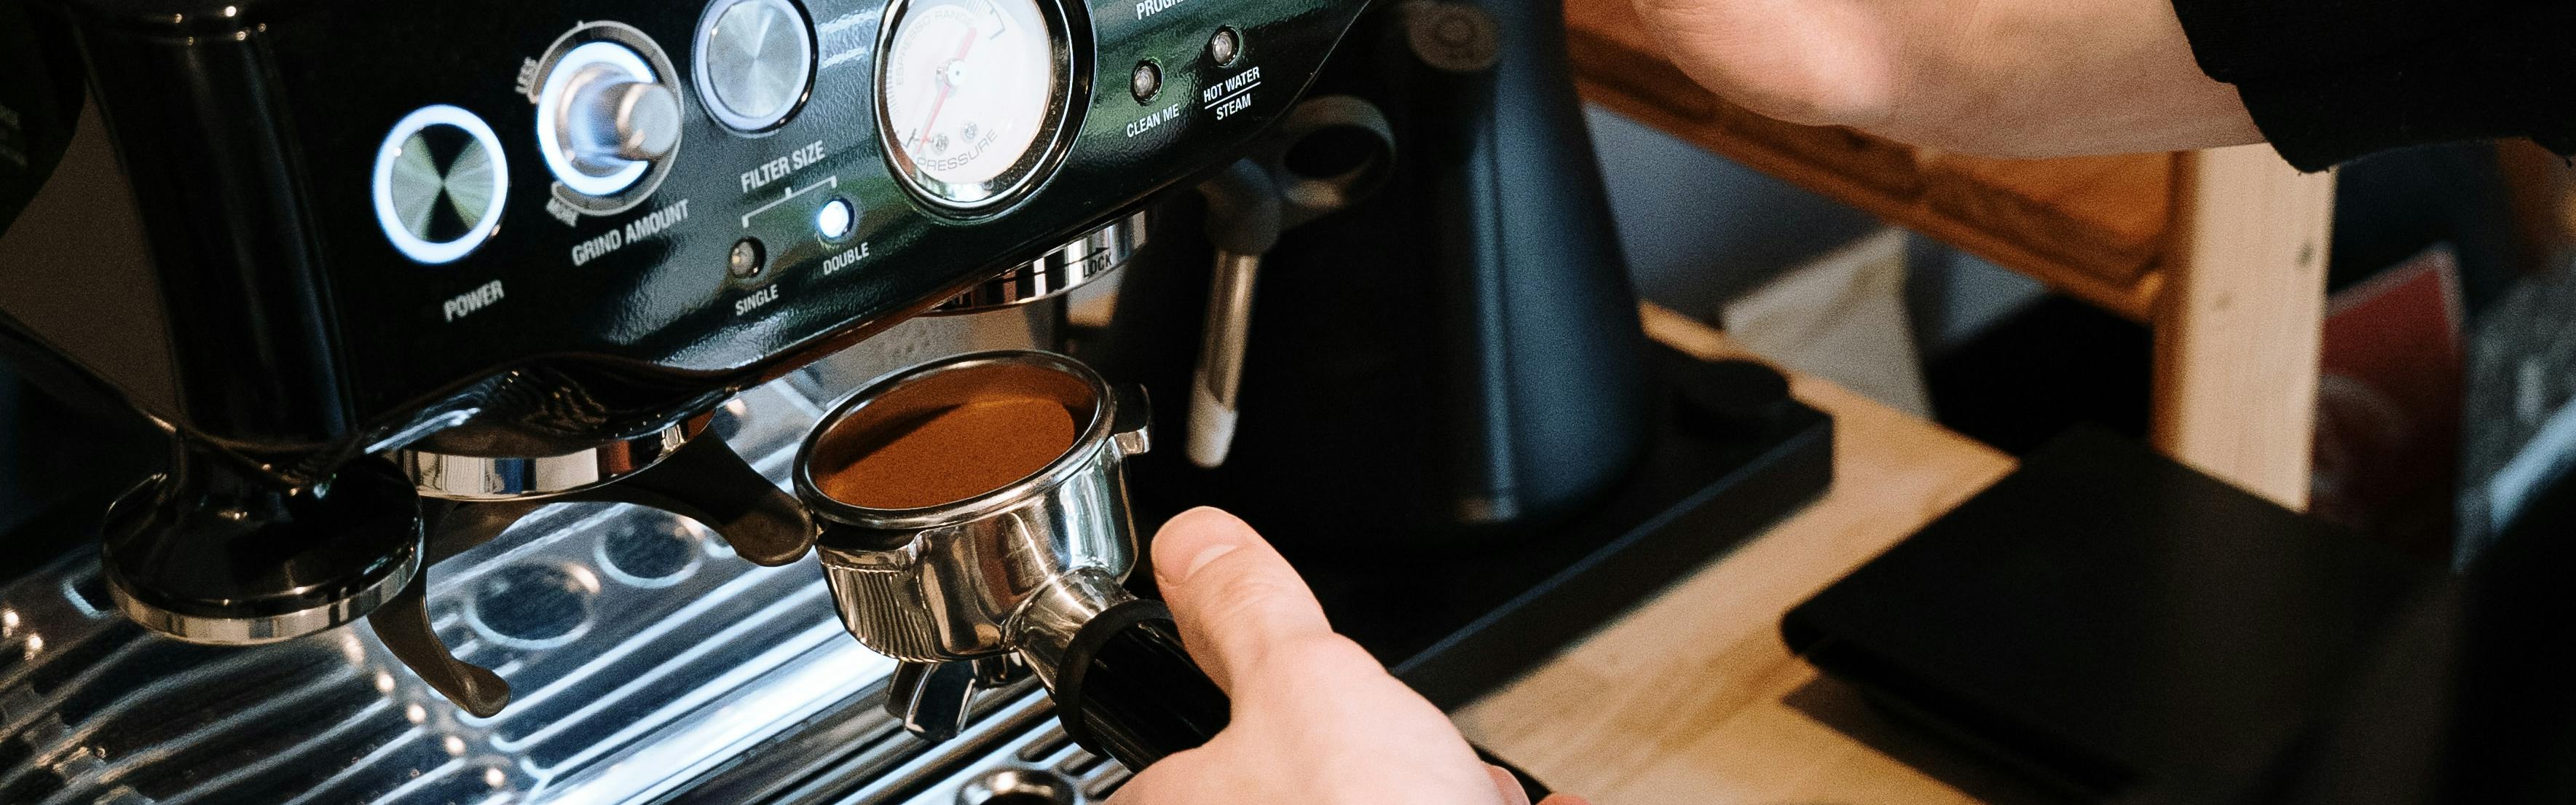 TOP 10 Accessories for The Barista EXPRESS! 